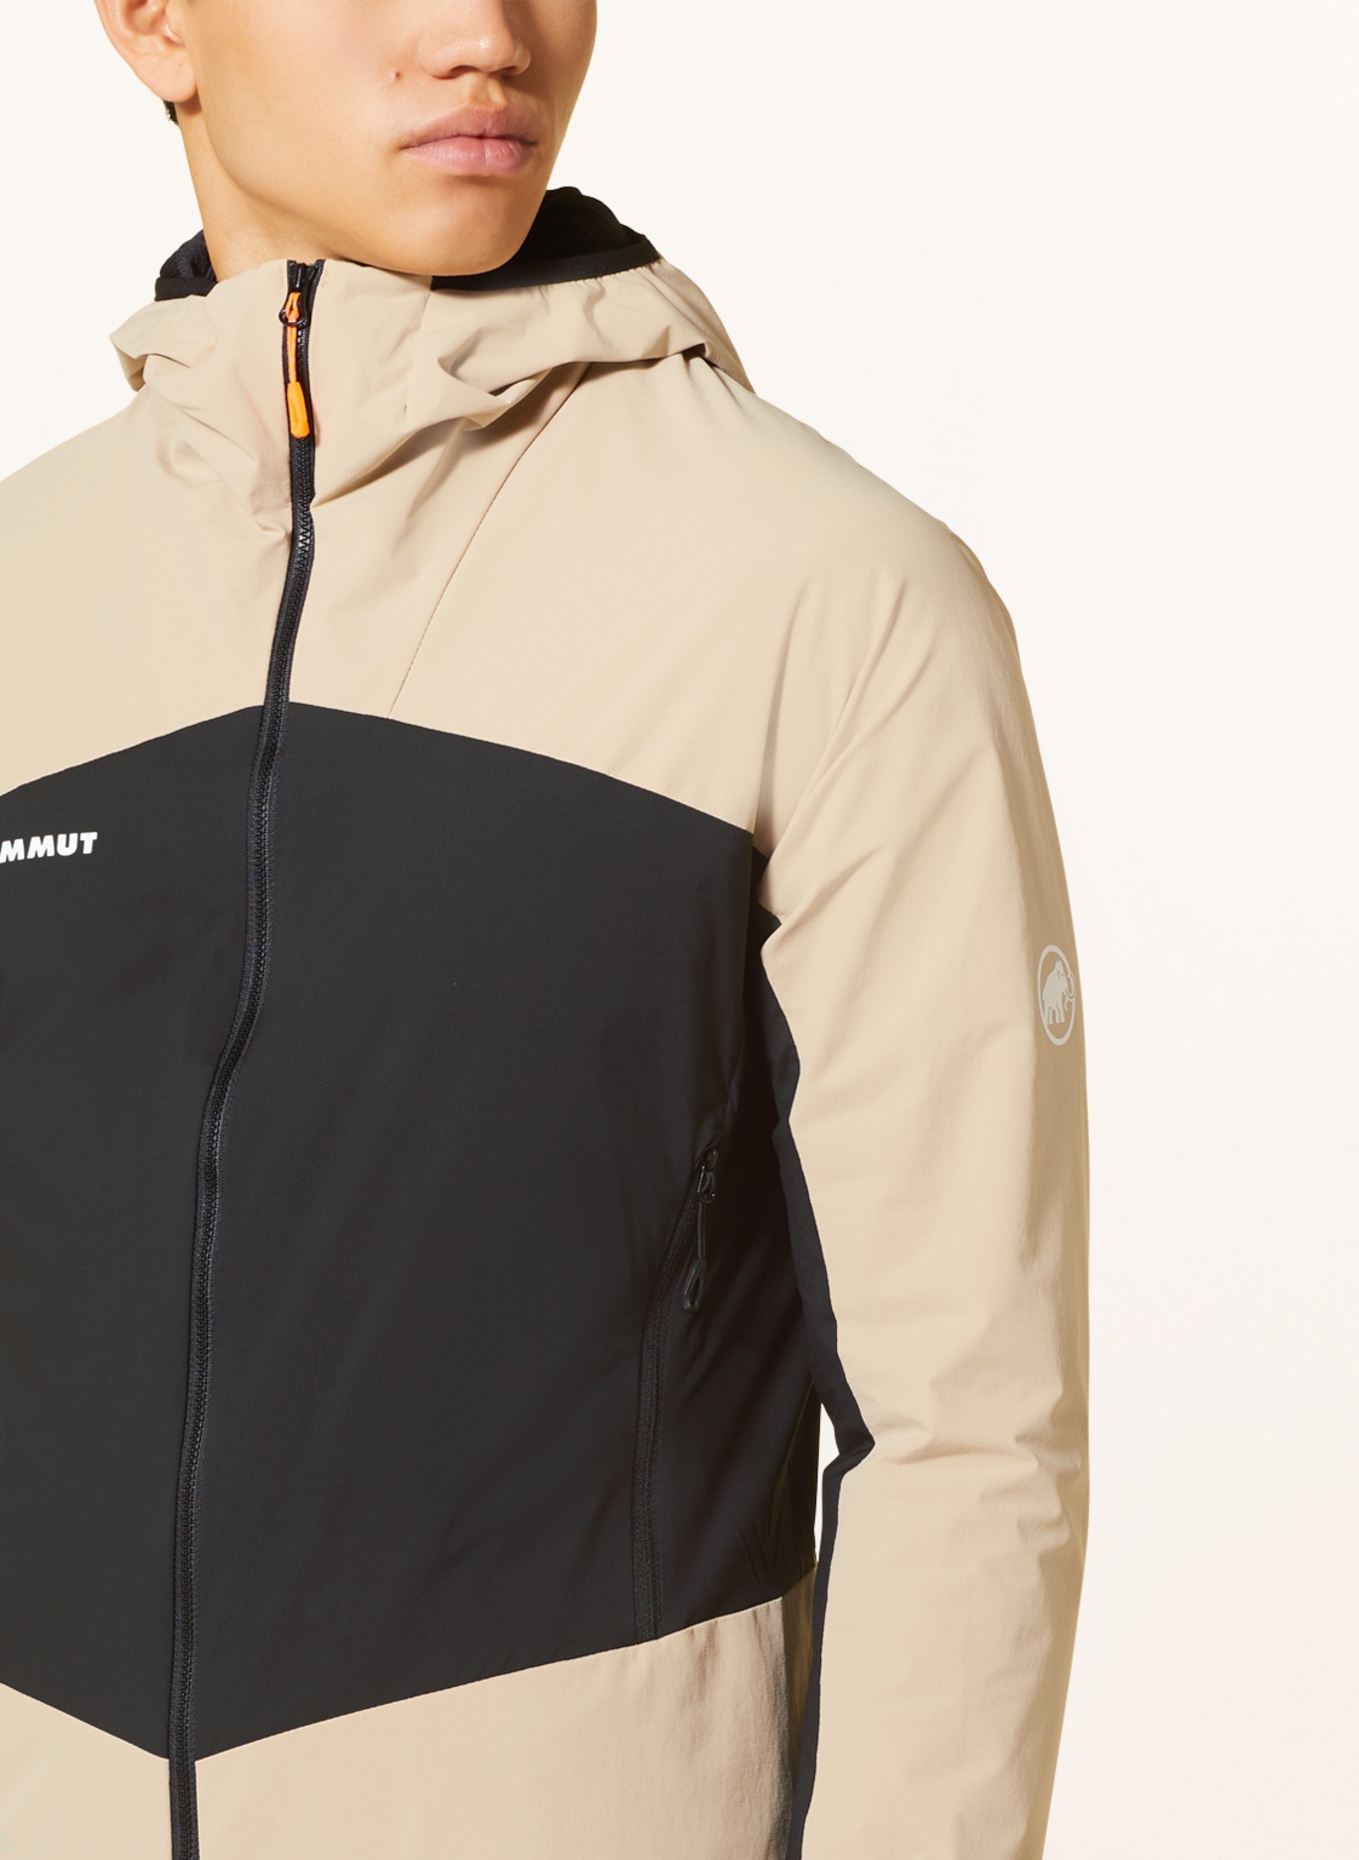 MAMMUT Hybrid jacket TAISS IN, Color: BEIGE/ BLACK (Image 5)